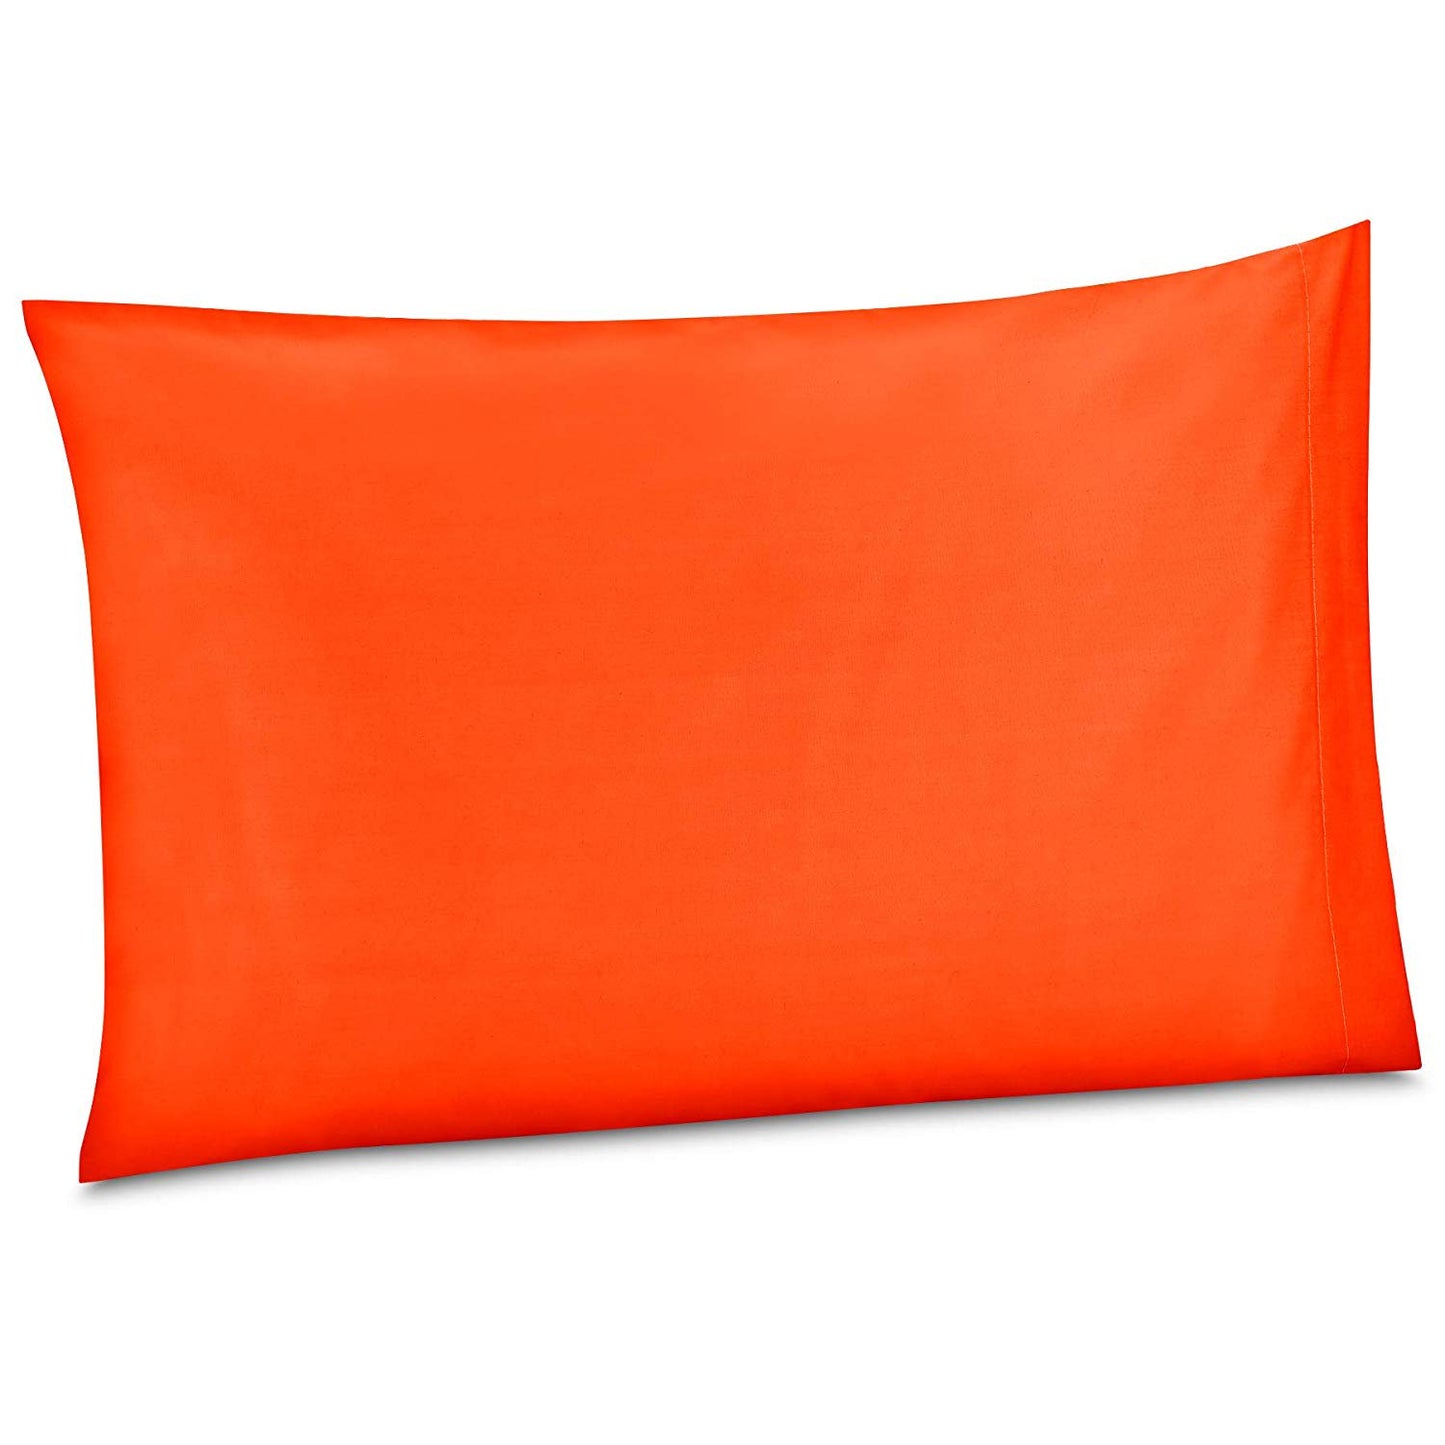 100% Cotton/Percale 210 Thread Count Pillow Cases Set of 2 Soft Orange Home Cotton Pillow Cover for Sleeping-Bedroom Pillowcases